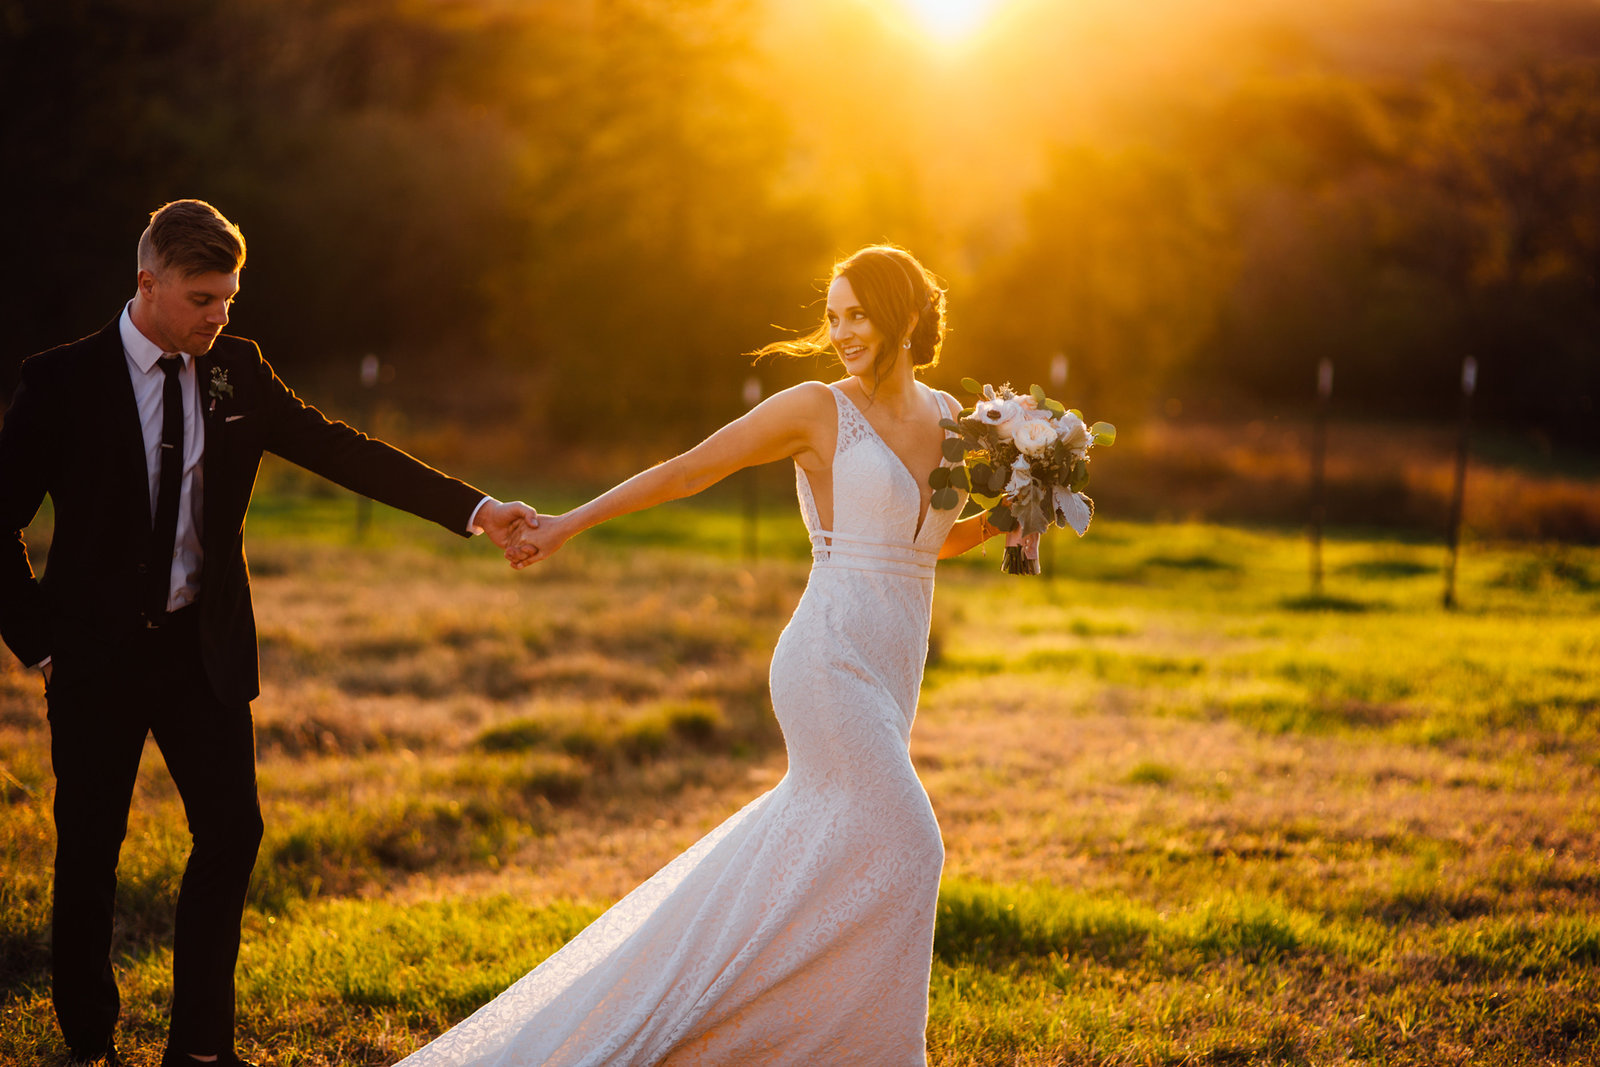 Bride leading groom through field during golden hour